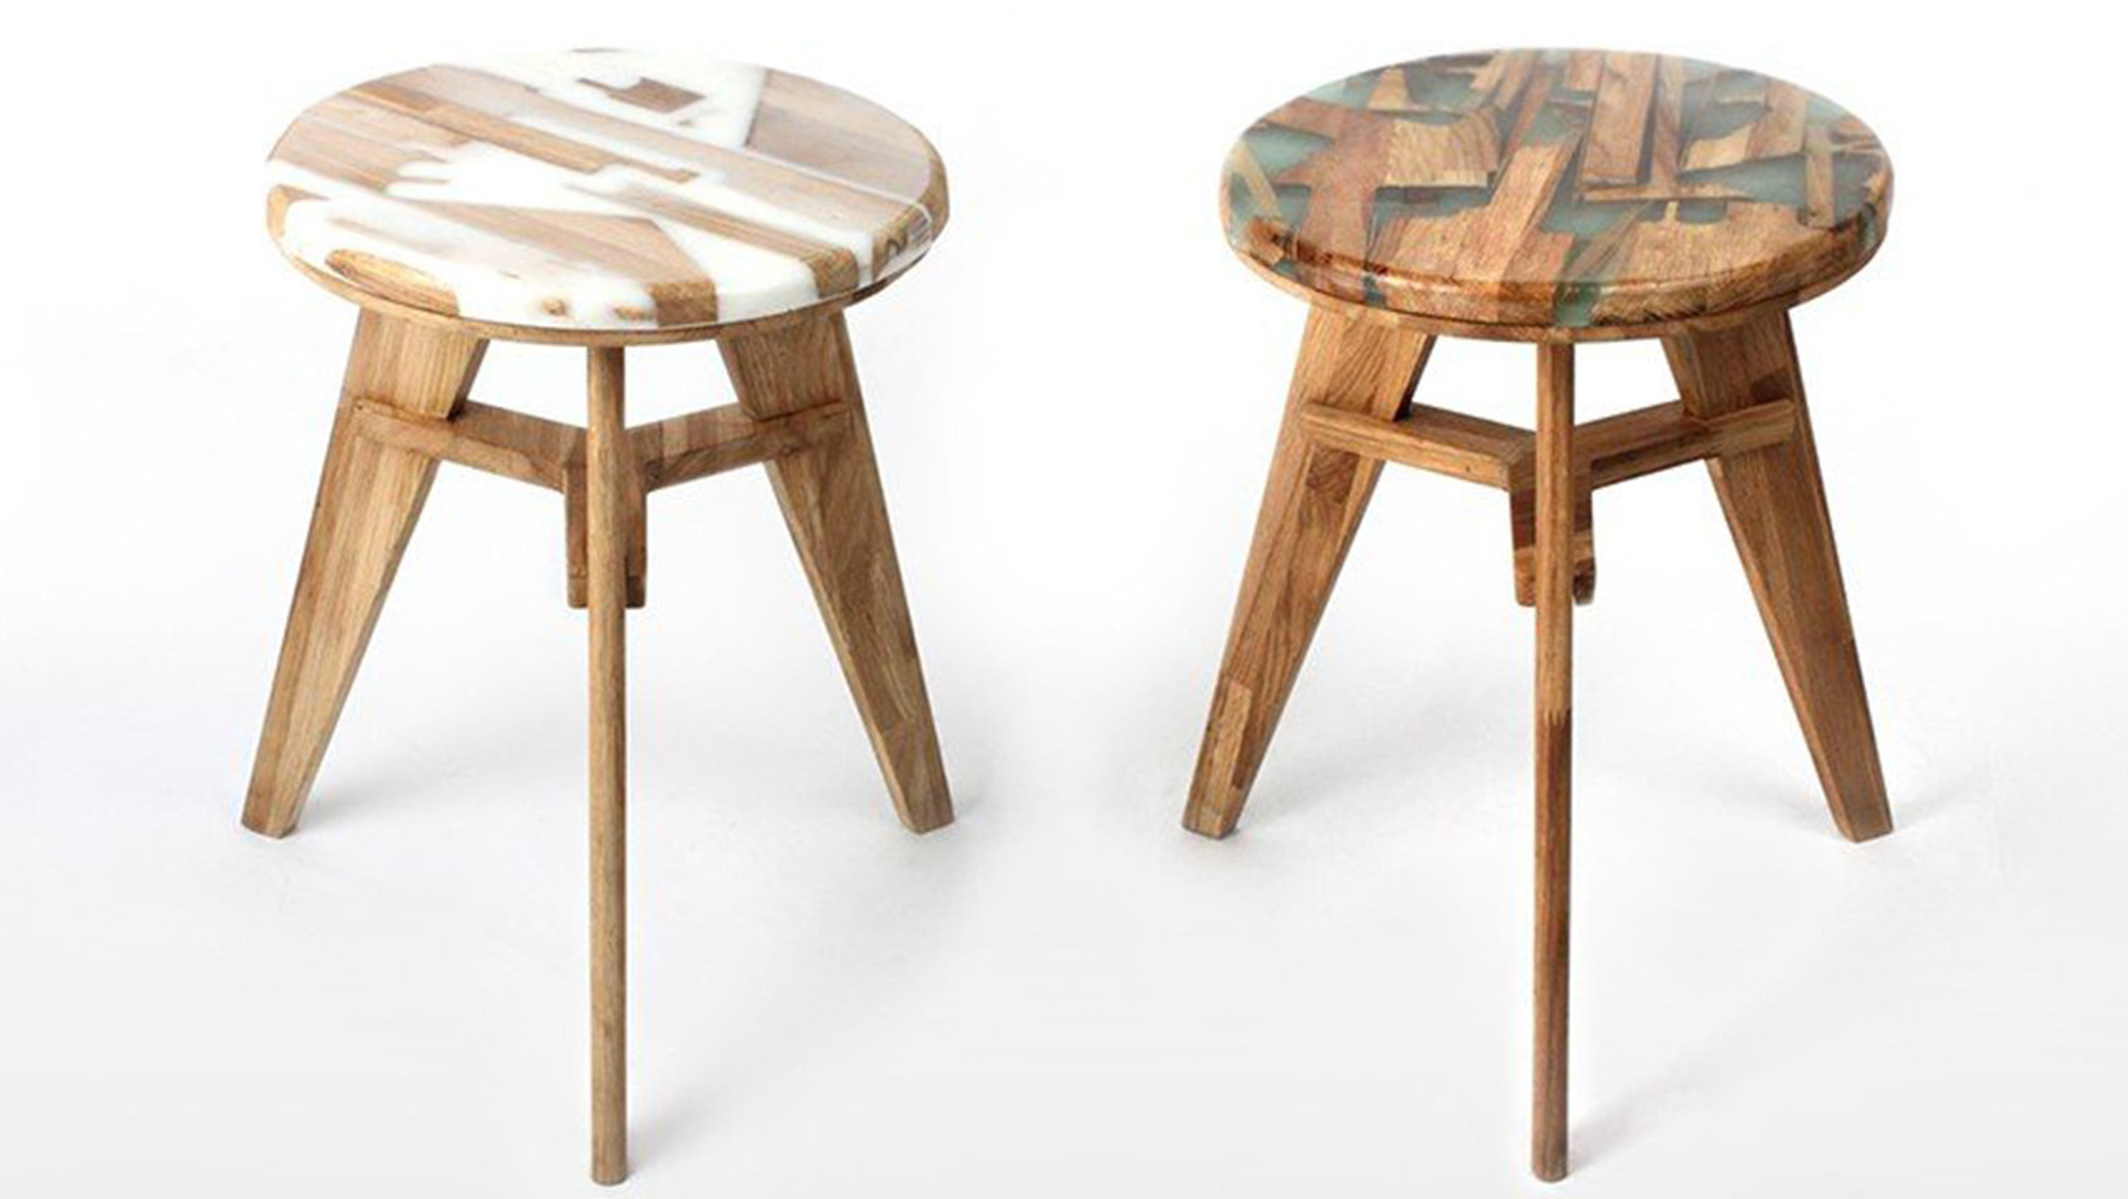 Unexpectedly beautiful stool made of wooden and resin